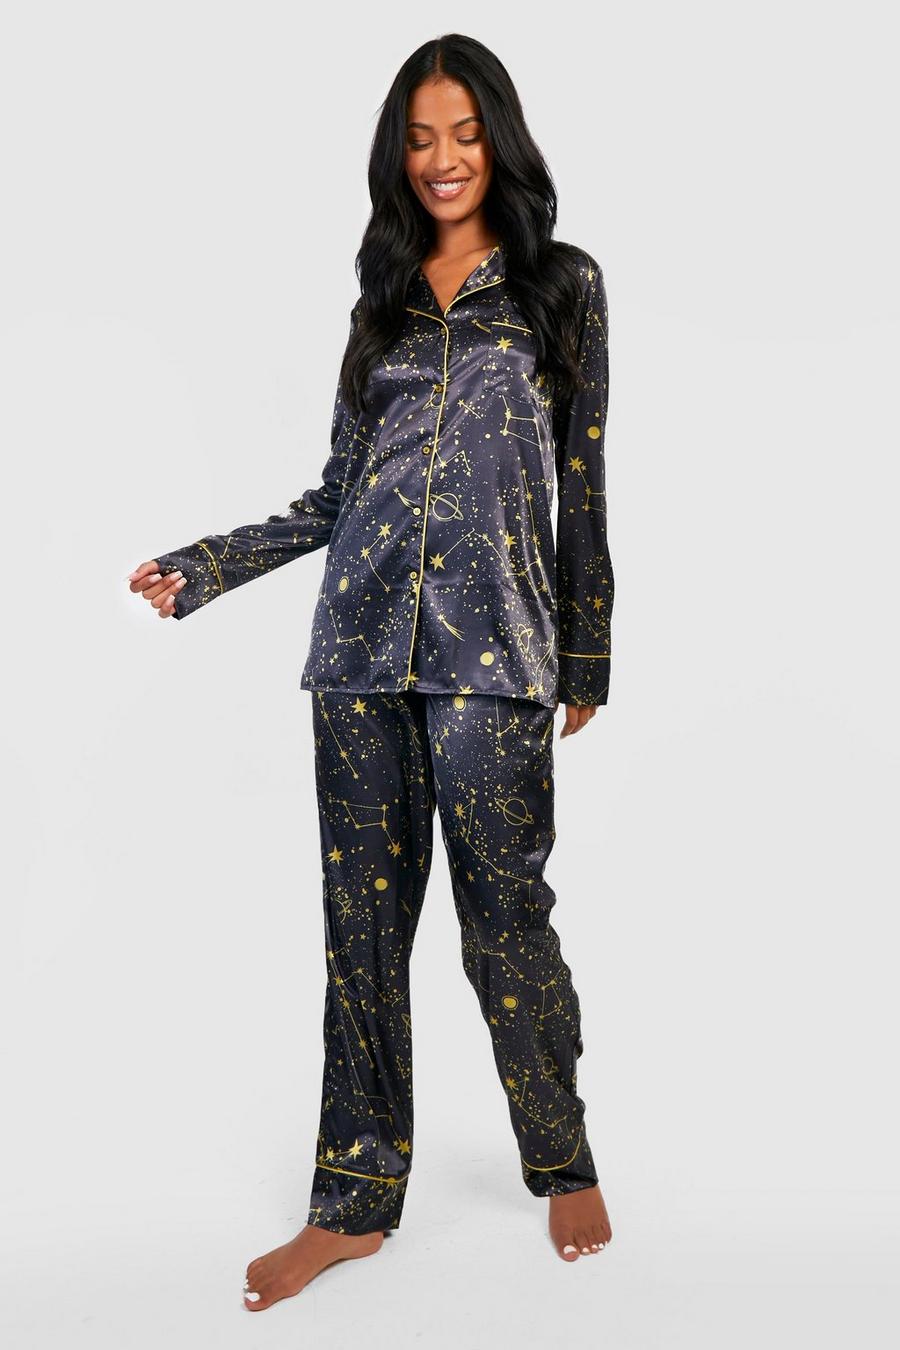 Stars Above Gold Pajama Pants for Women